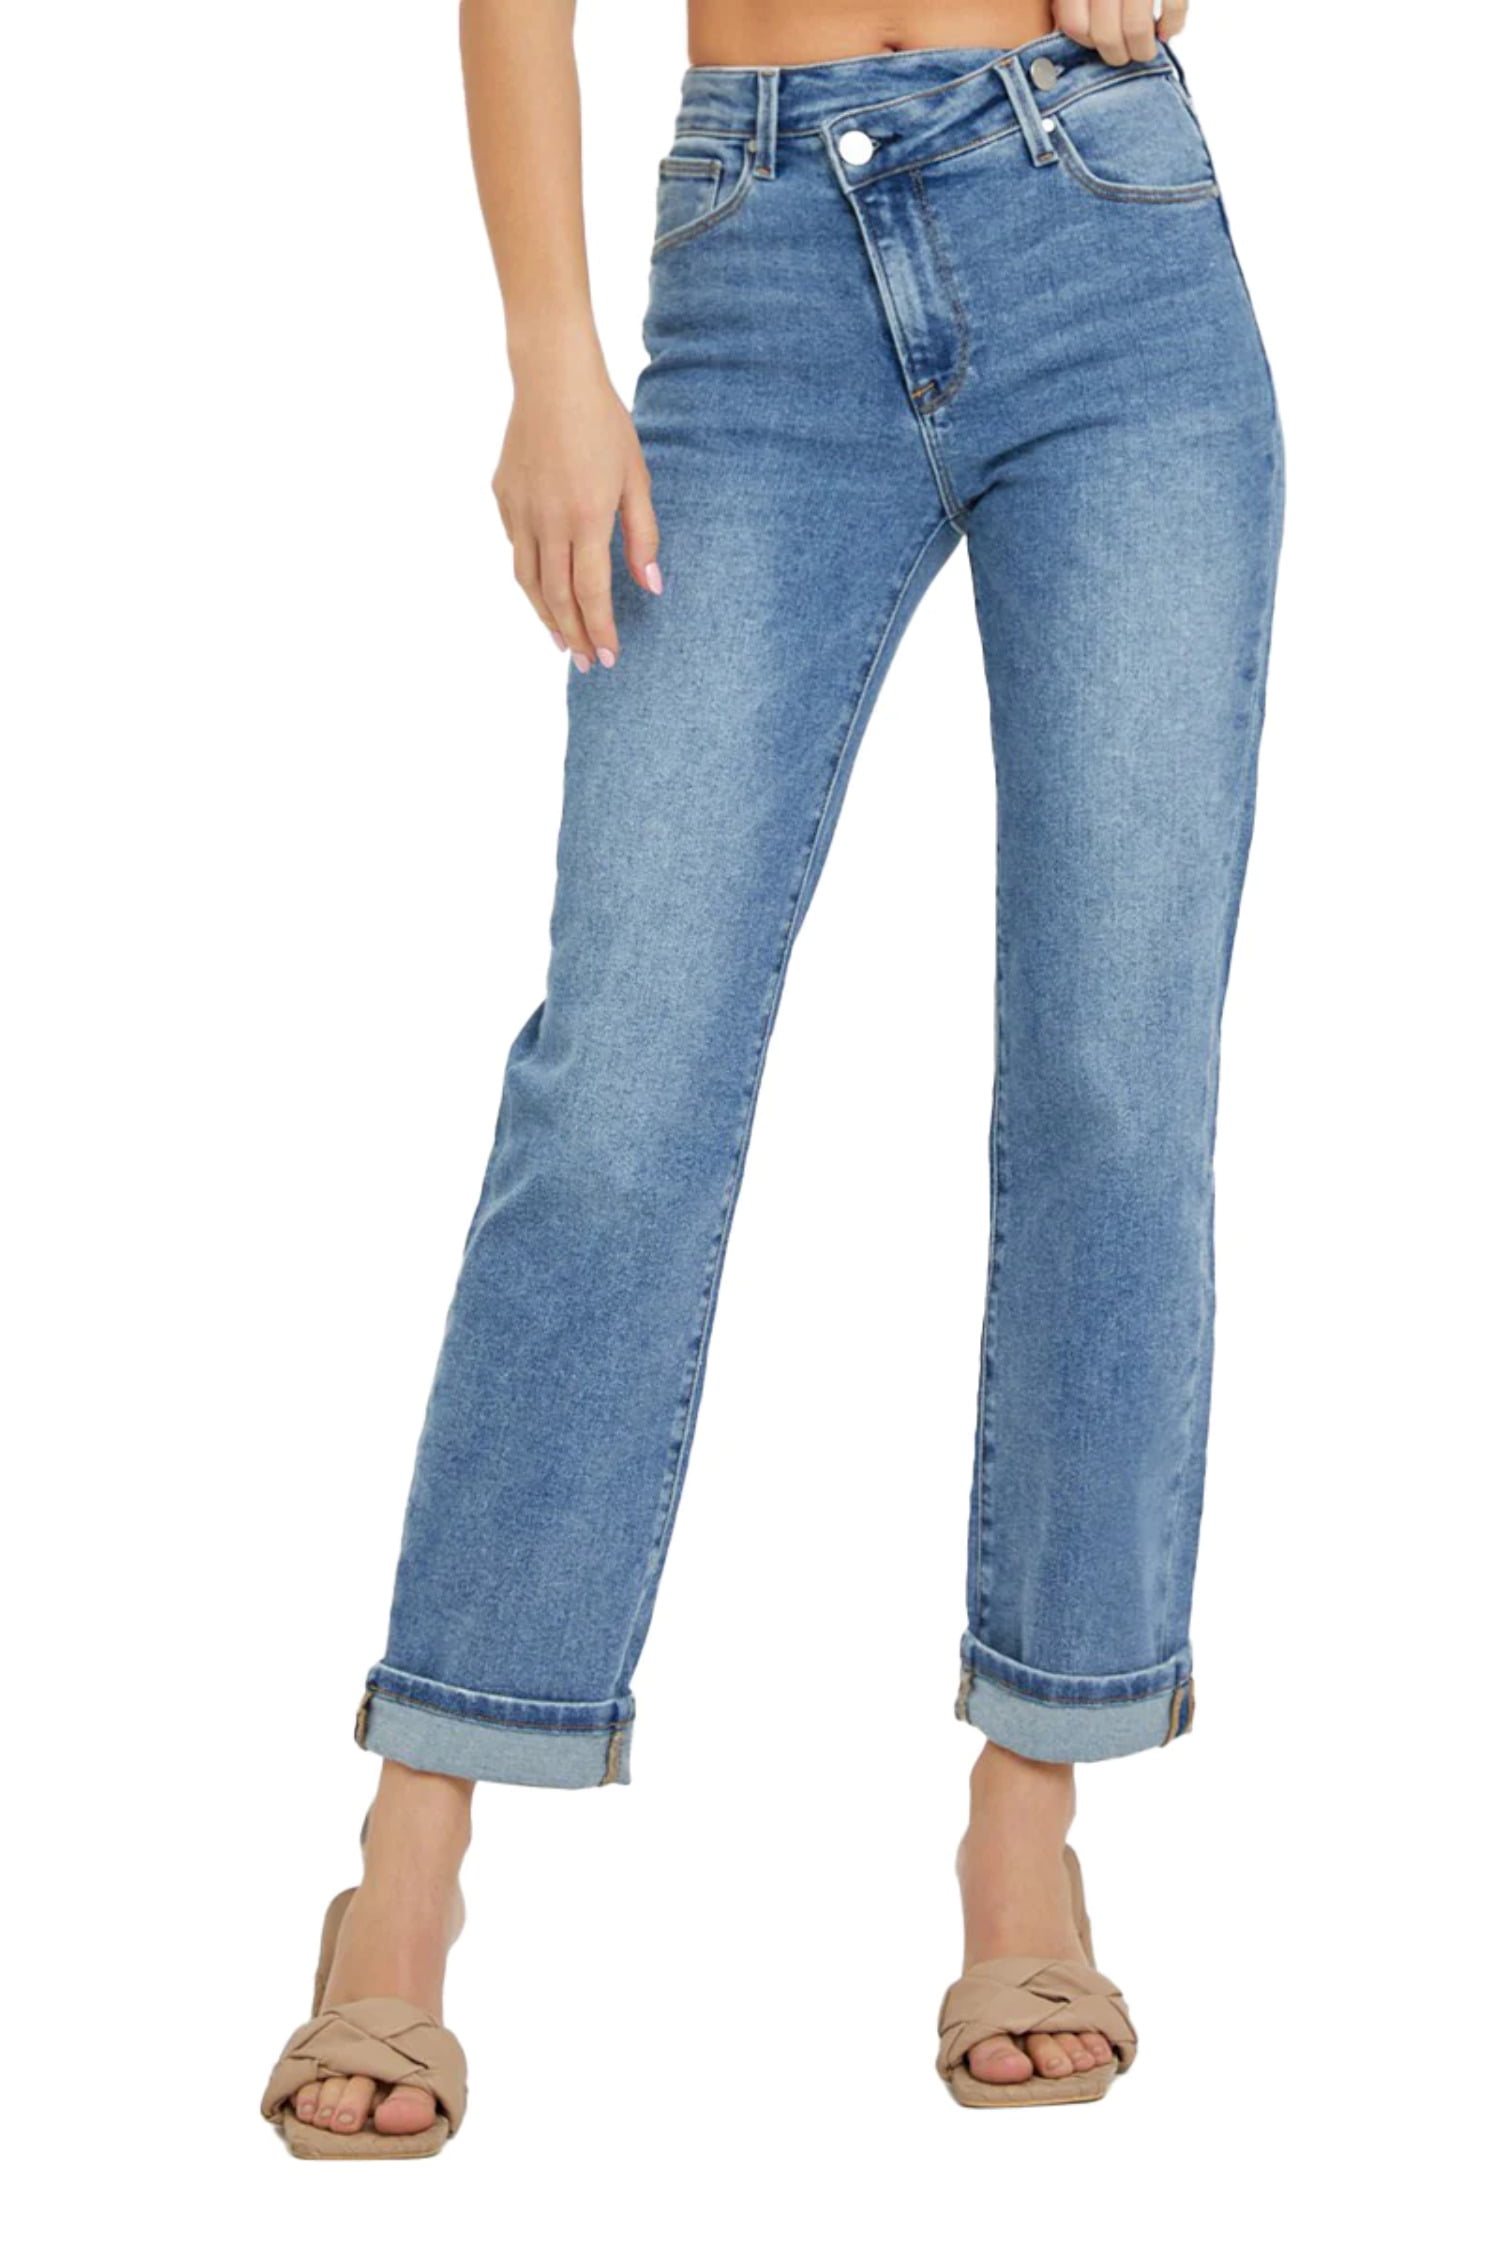 SALT TREE Risen Jeans - High Rise Relaxed Straight Jeans